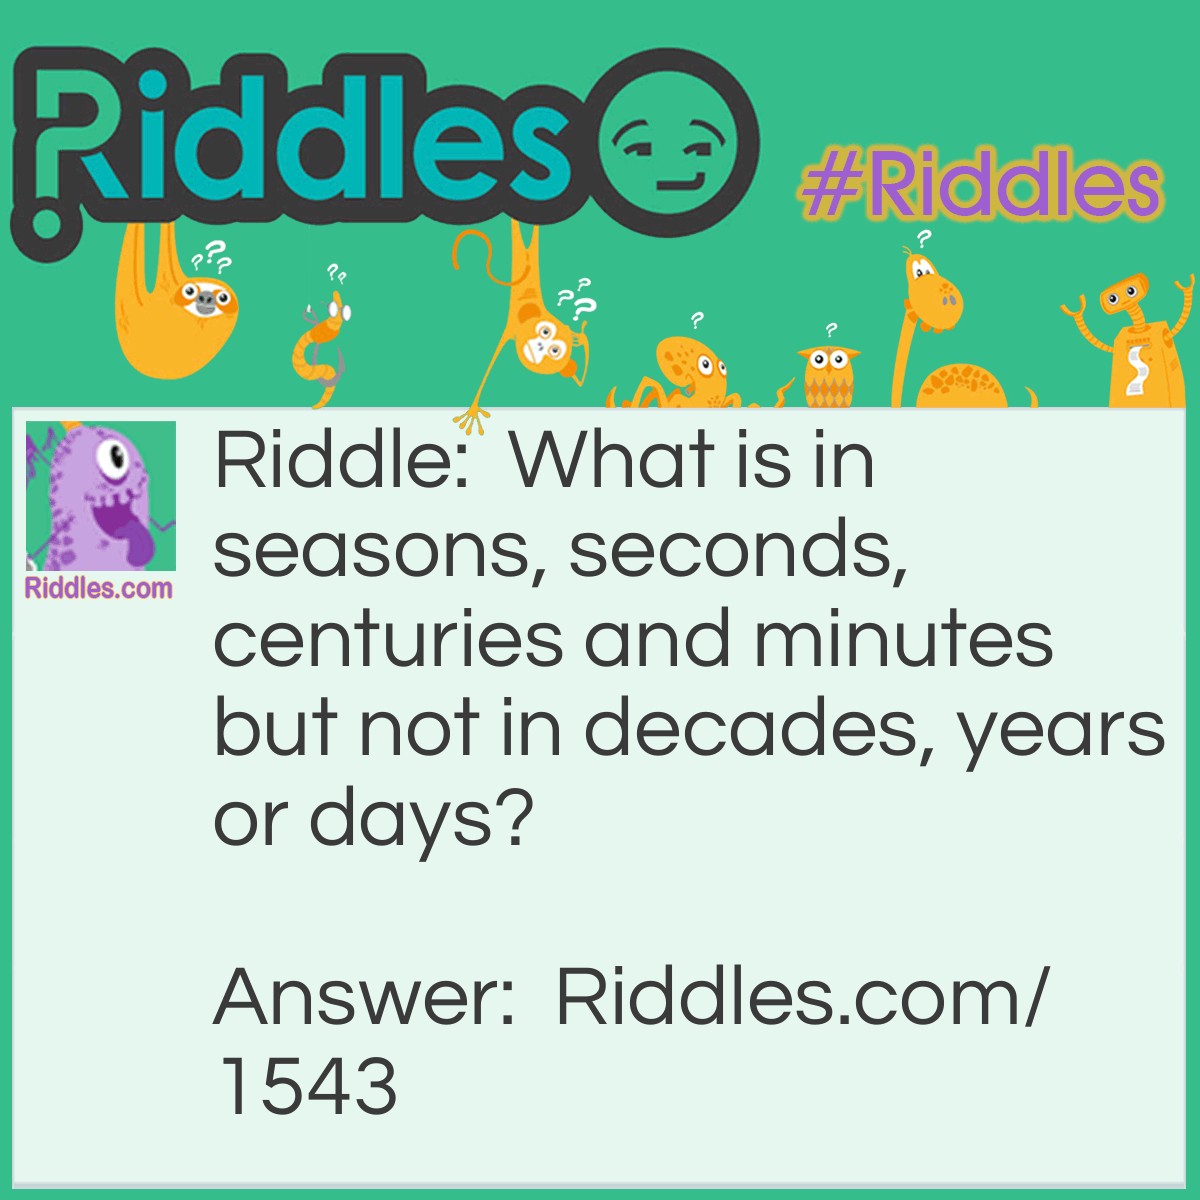 Riddle: What is in seasons, seconds, centuries and minutes but not in decades, years or days? Answer: The letter N.